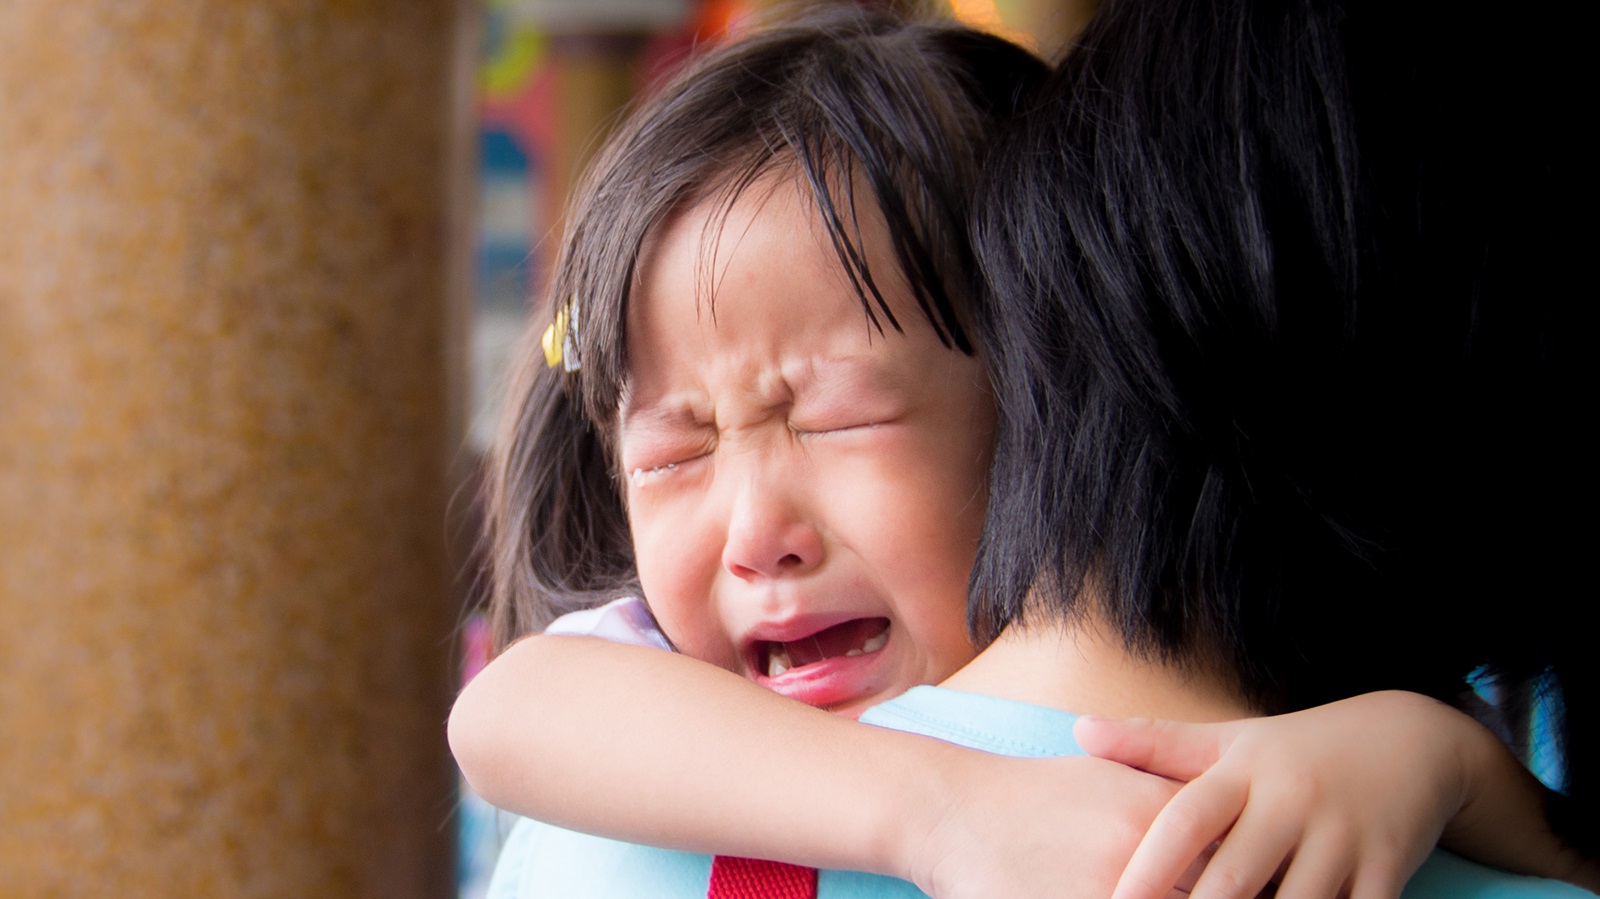 Bothered by misbehaving kids? Don’t be too quick to blame their parents